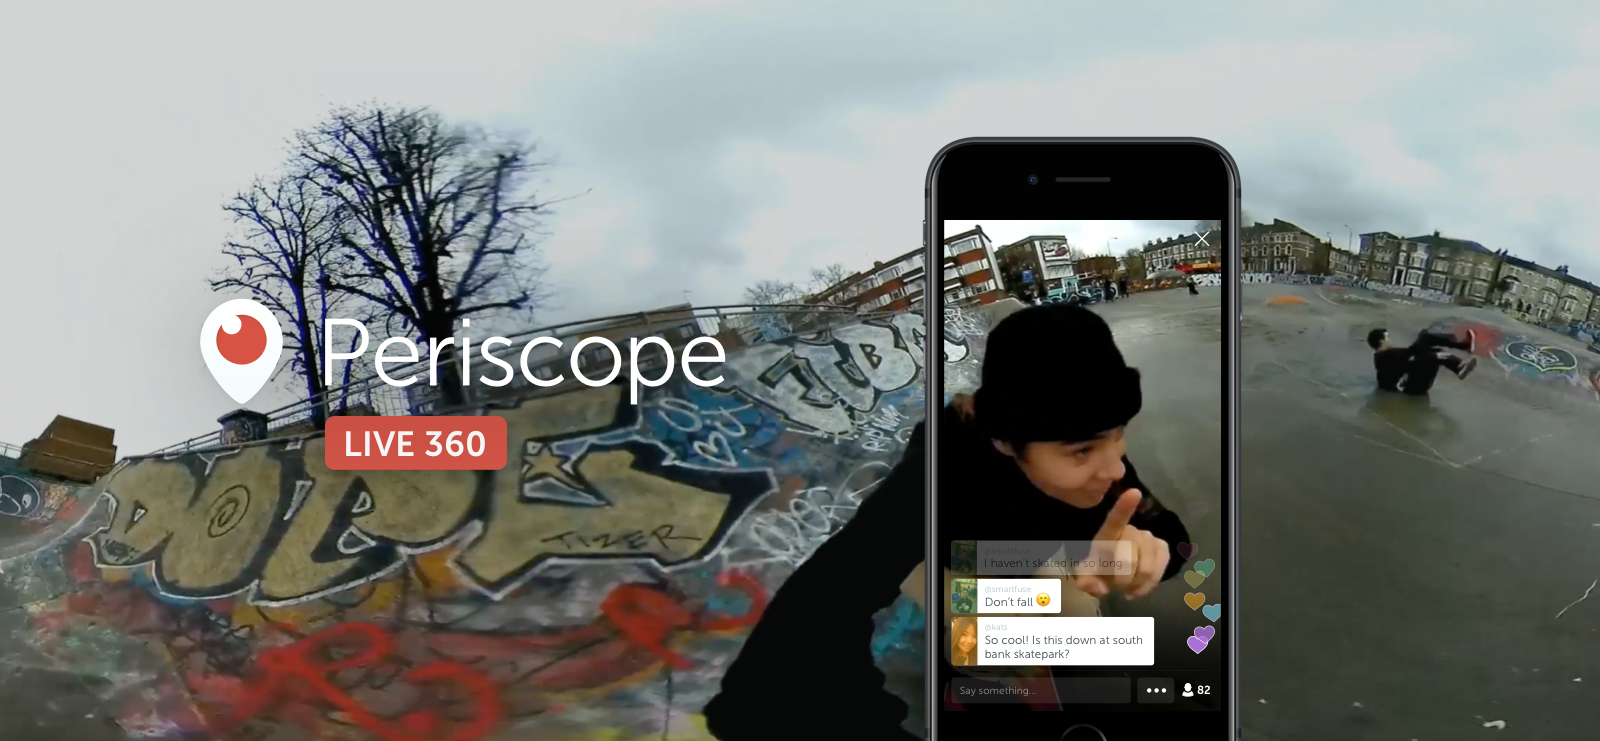 twitter and periscope introduce live 360 video image 1